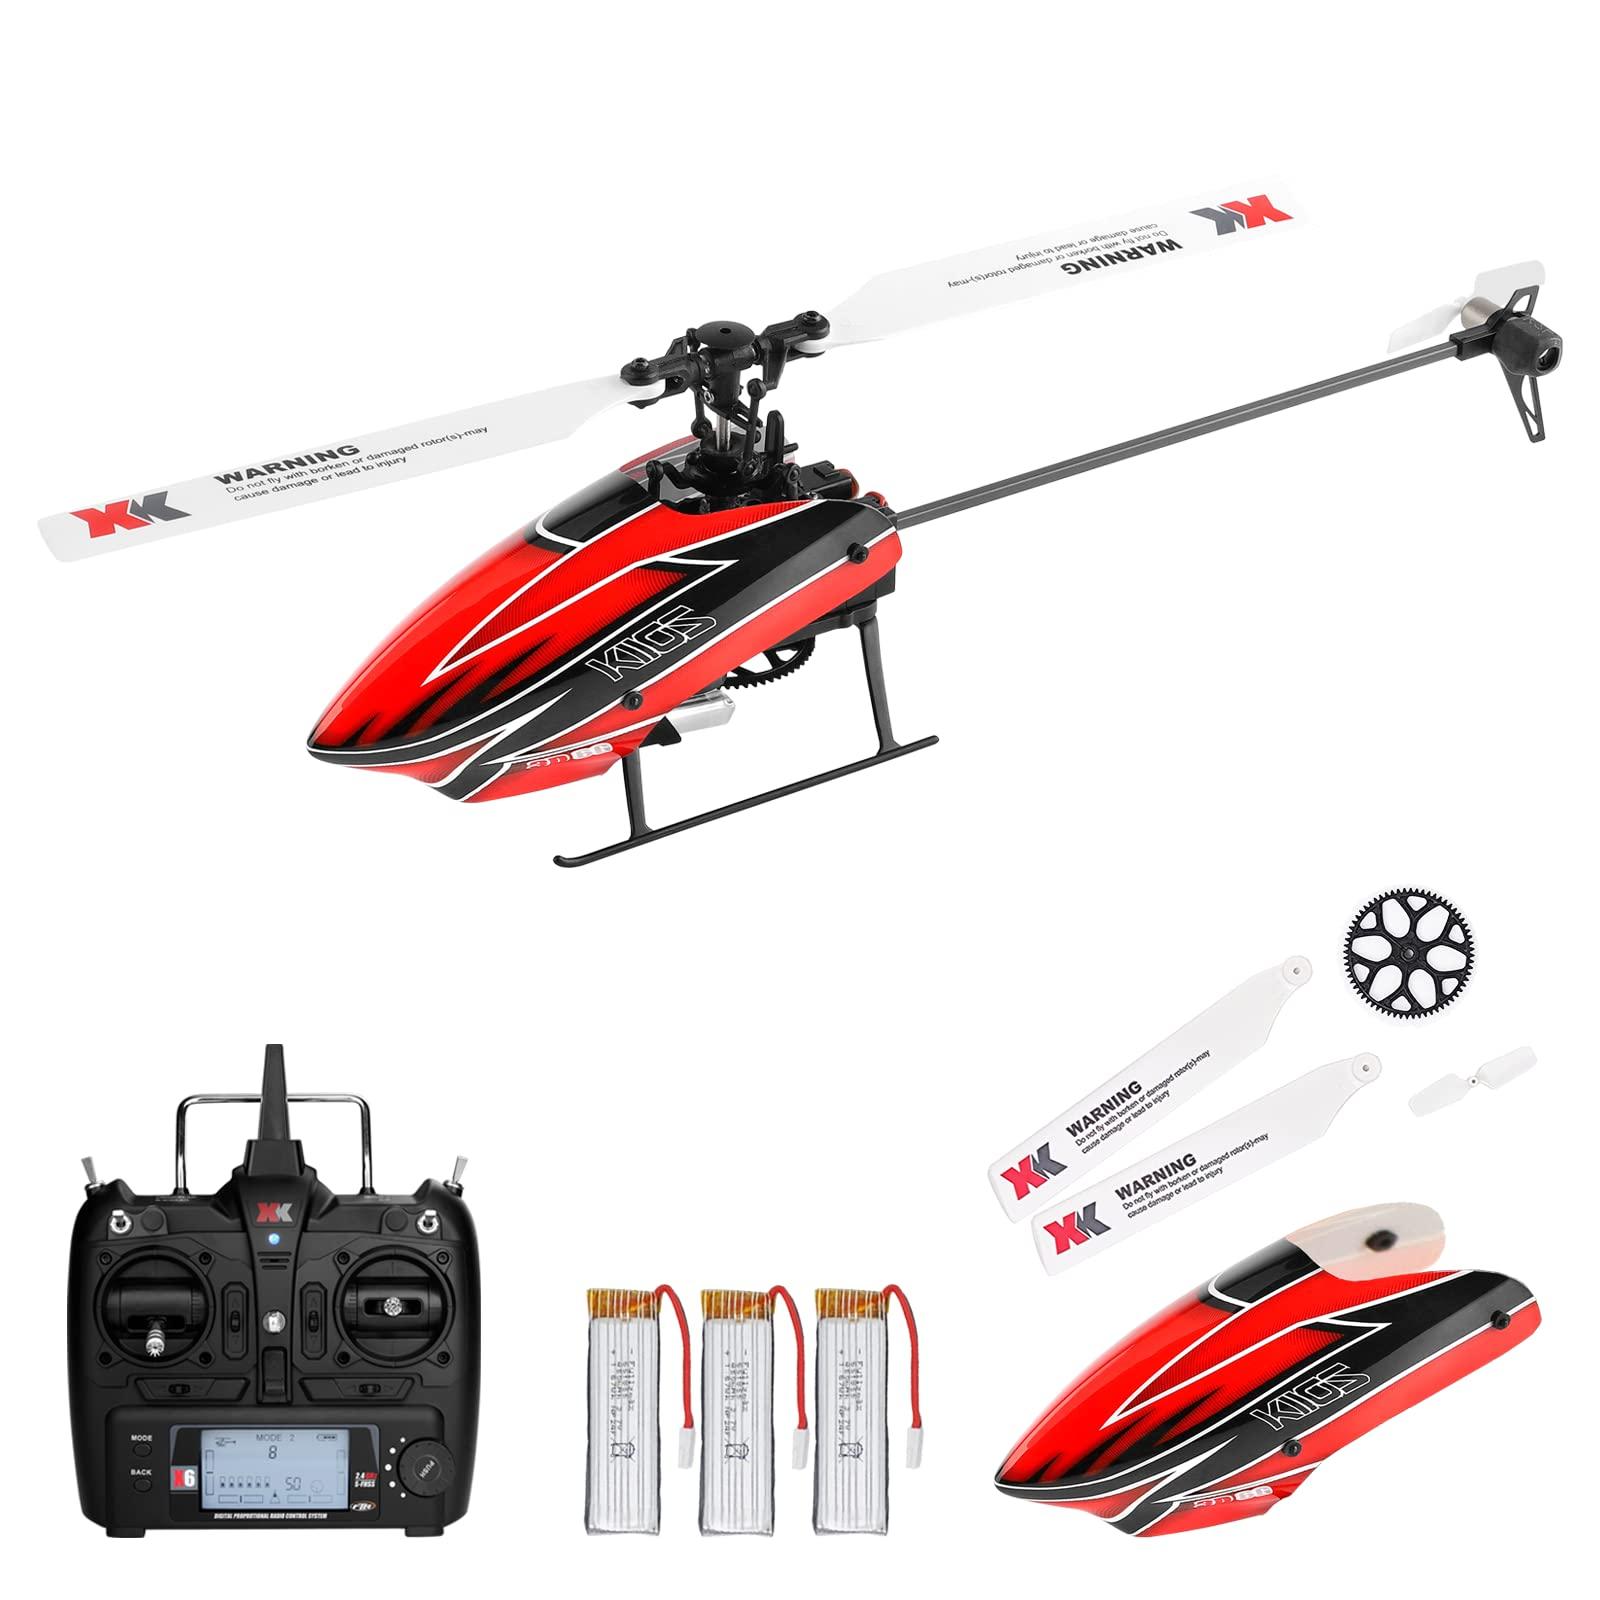 Miniature Rc Helicopter: Small yet powerful: The appeal of miniature RC helicopters